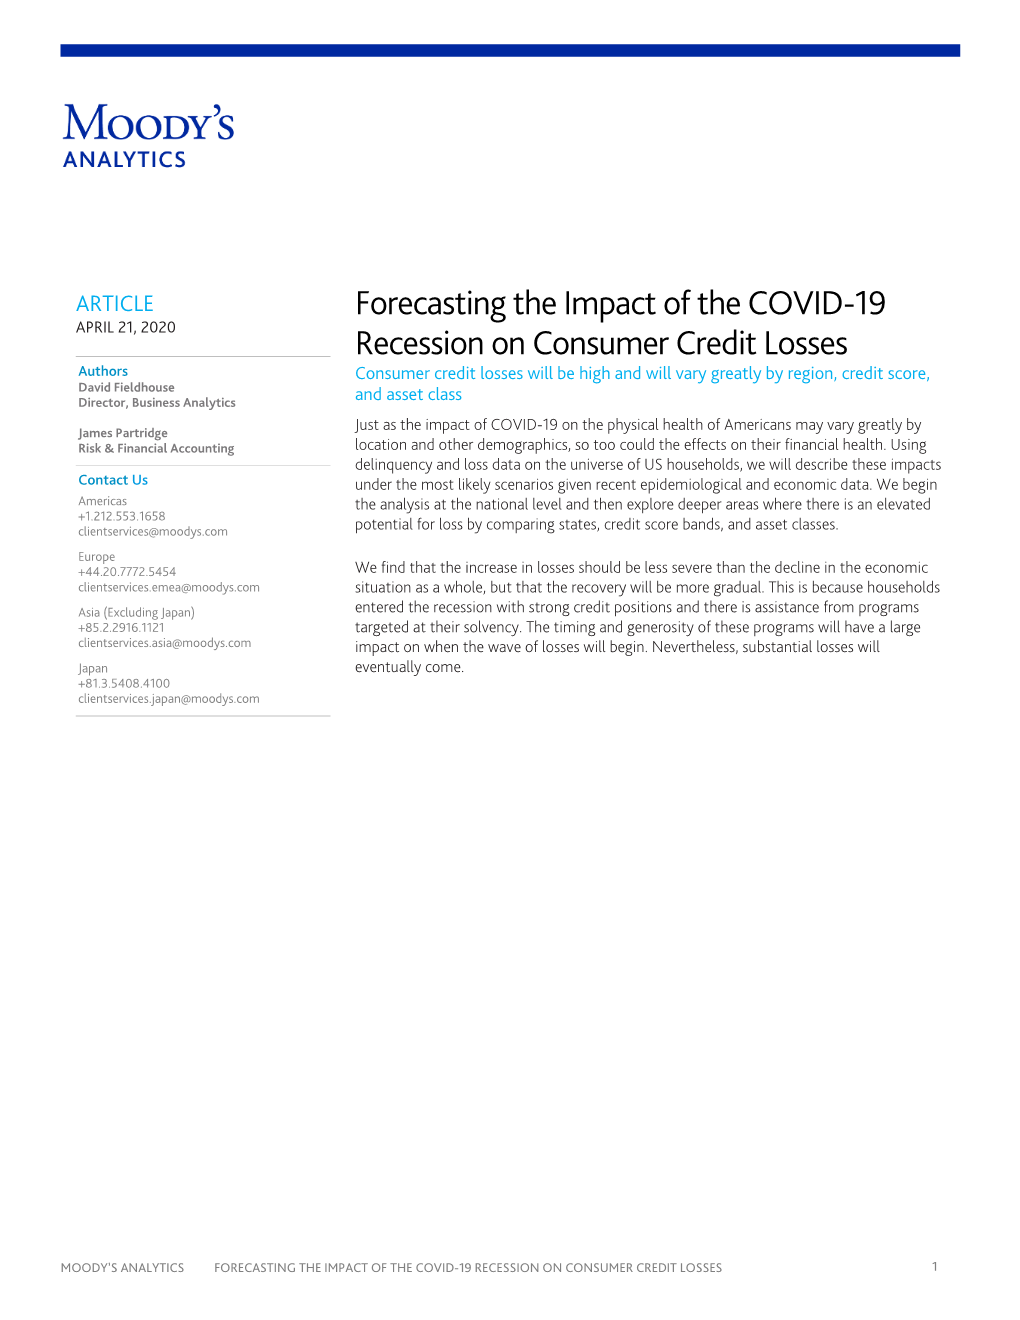 Forecasting the Impact of the Covid-19 Recession on Consumer Credit Losses 1